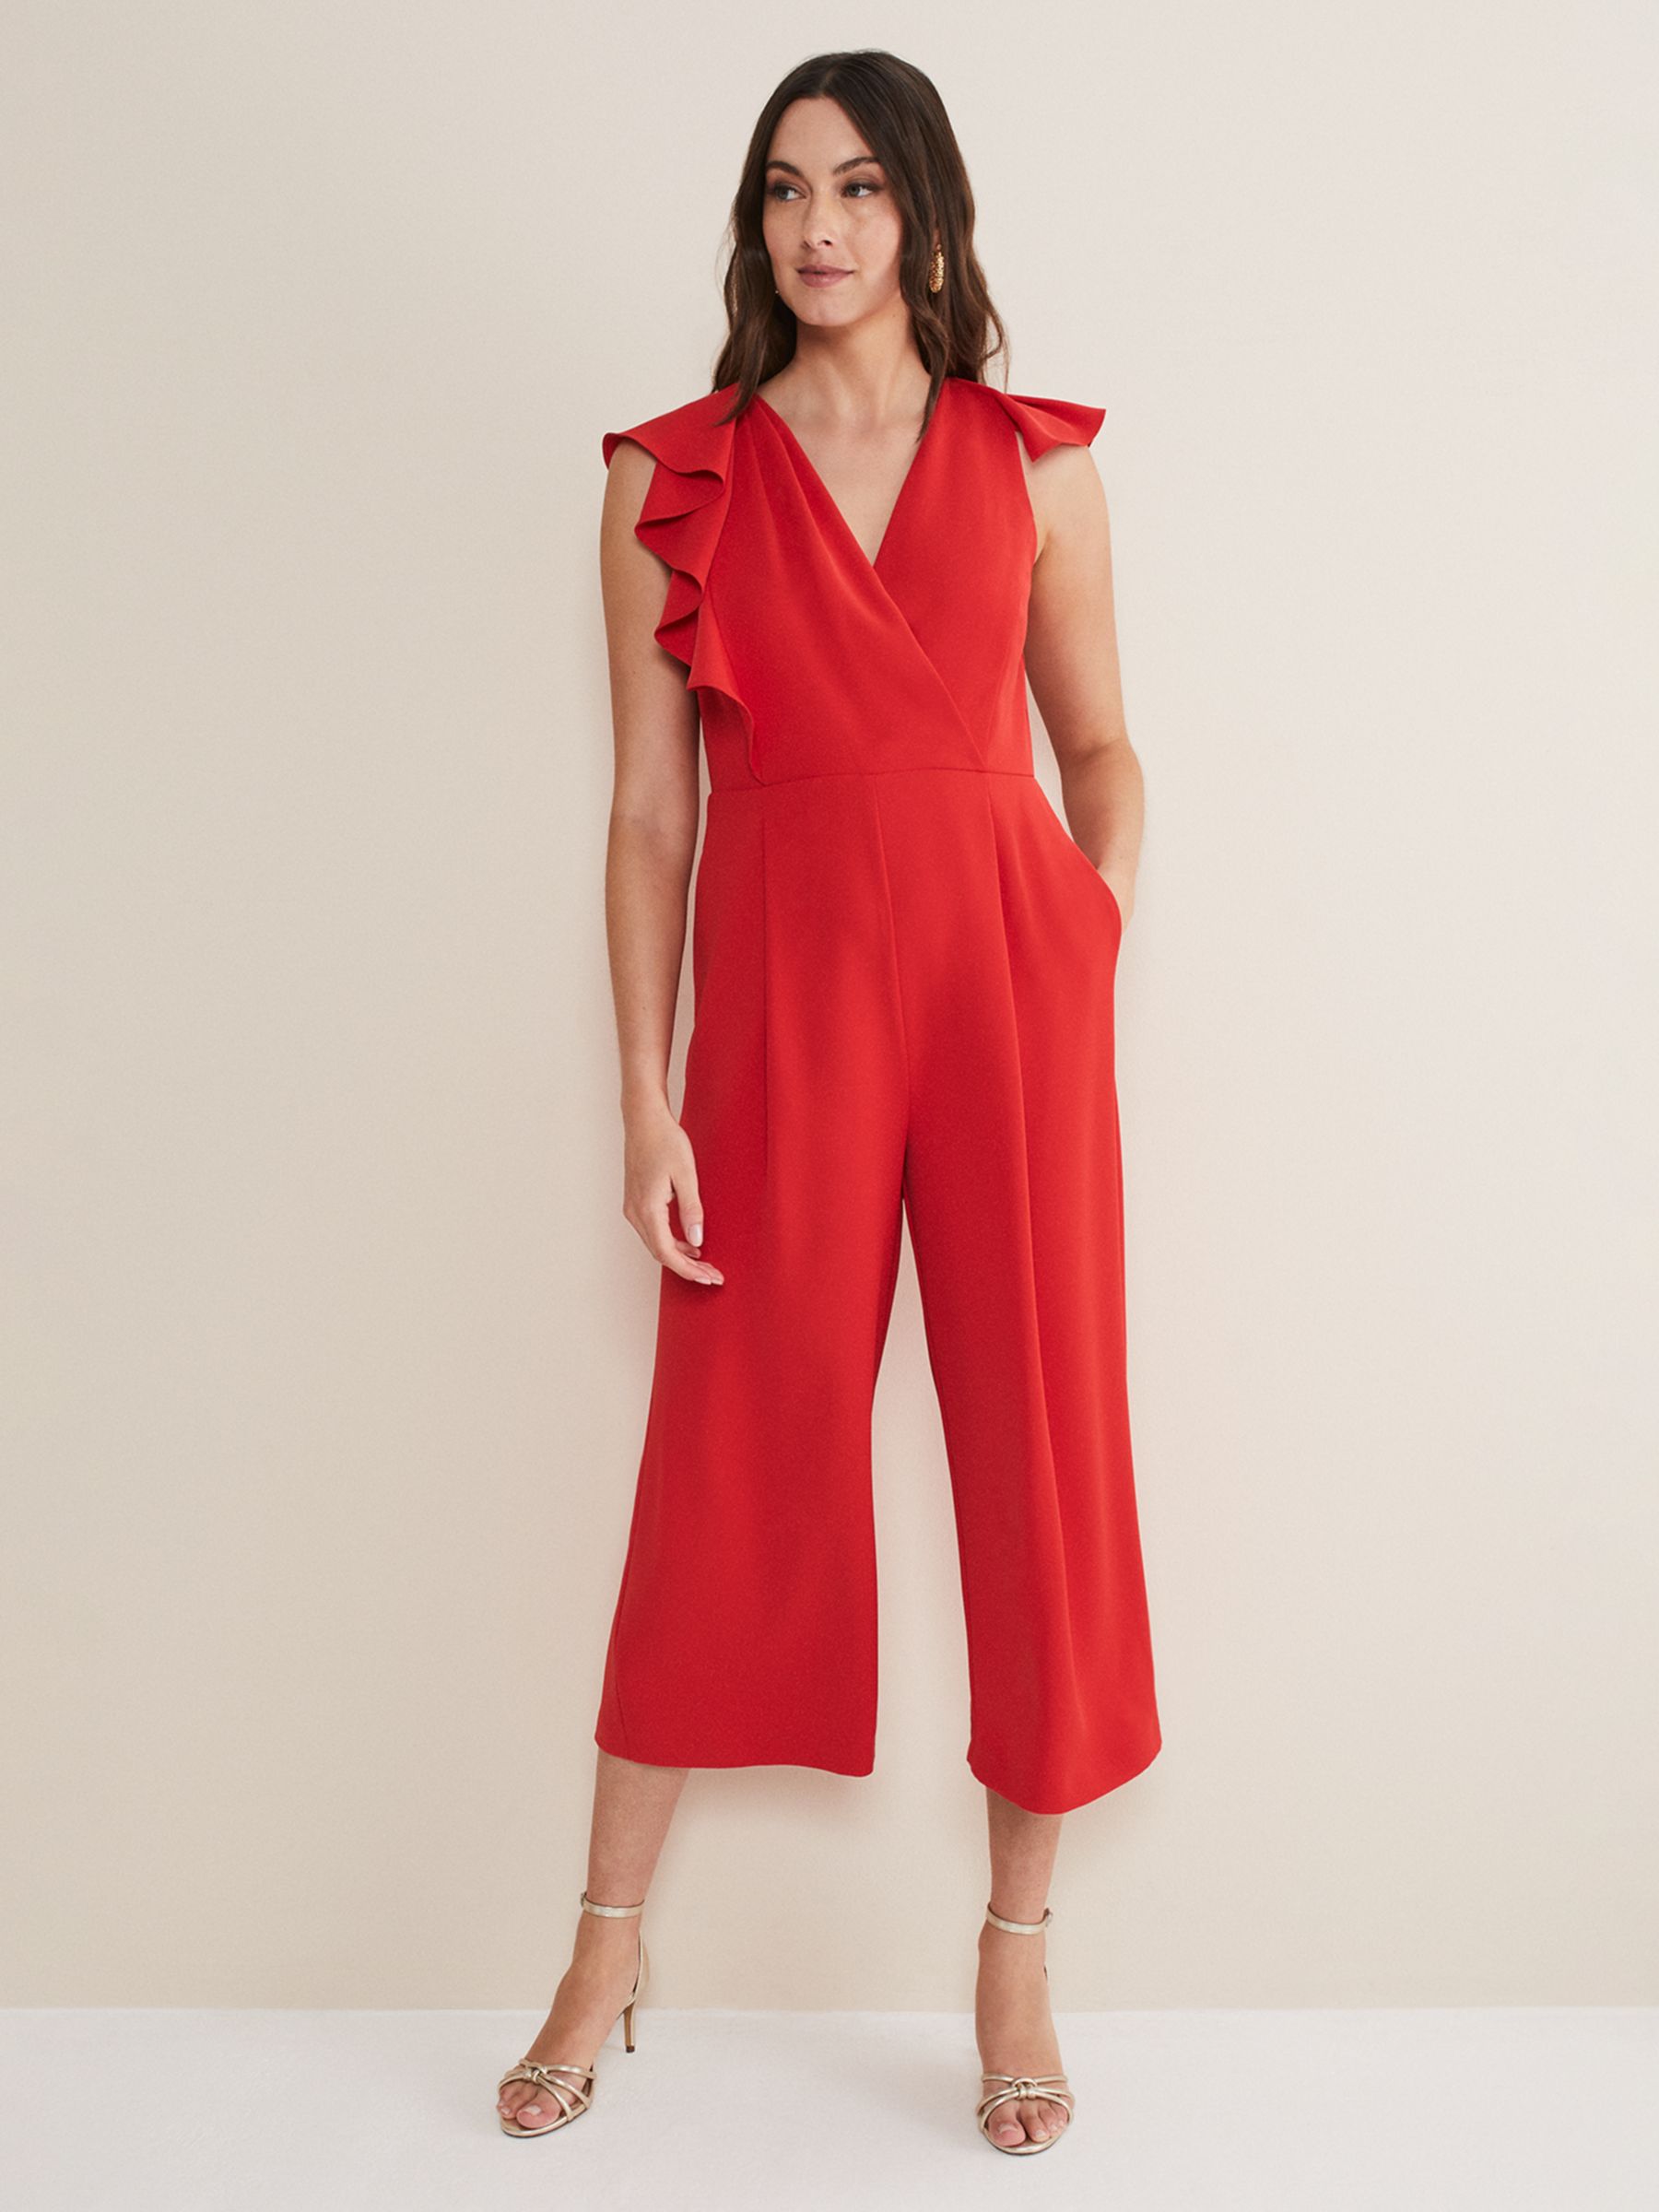 Phase Eight NIcky Ruffle Jumpsuit, Red, 6